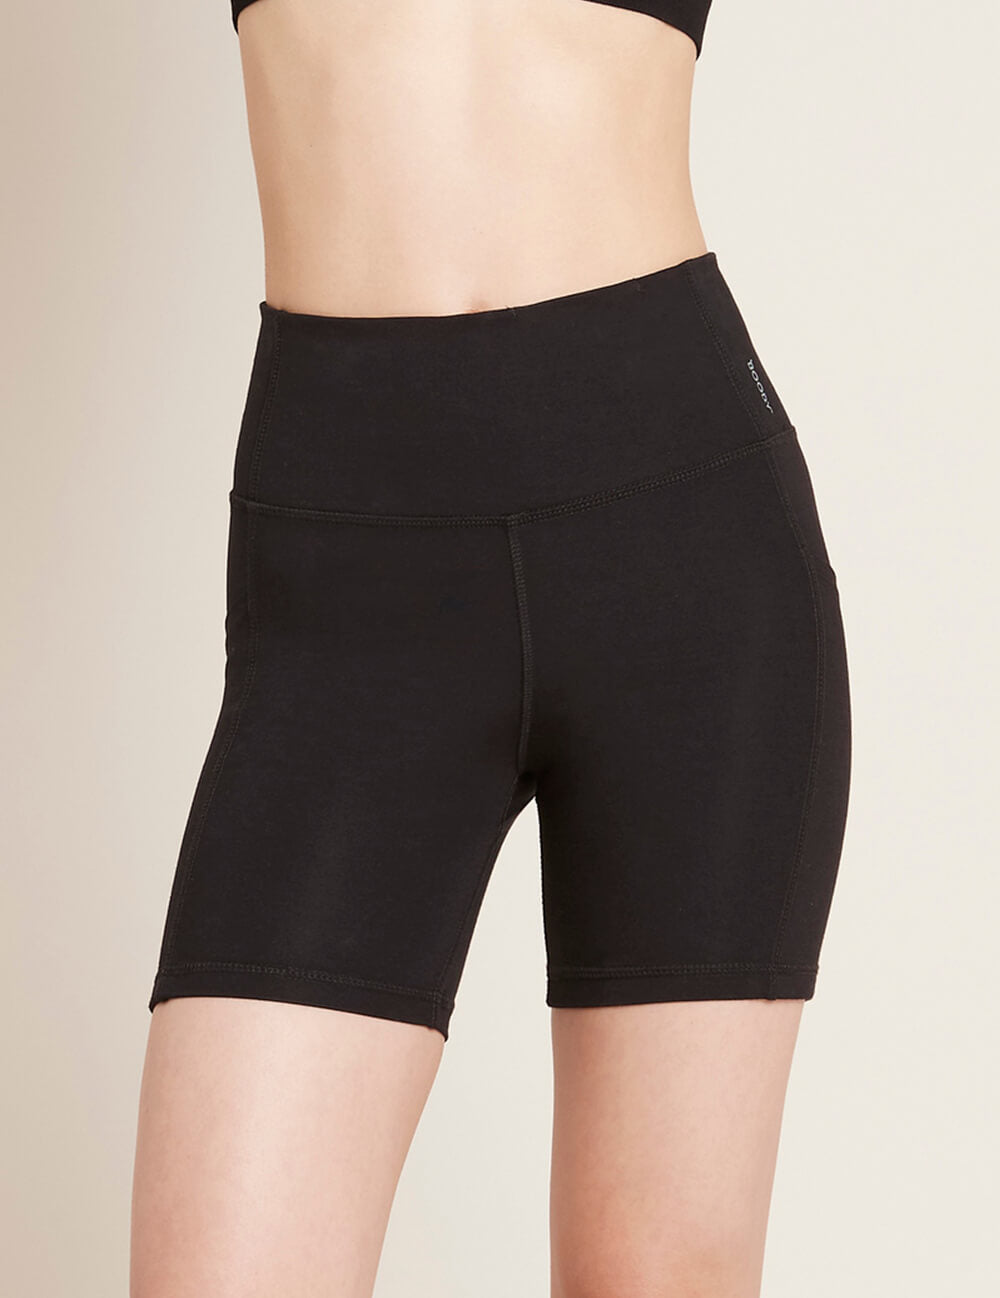 Boody Bamboo Active High-Waisted 5" Exercise Short with Pockets in Black Front View